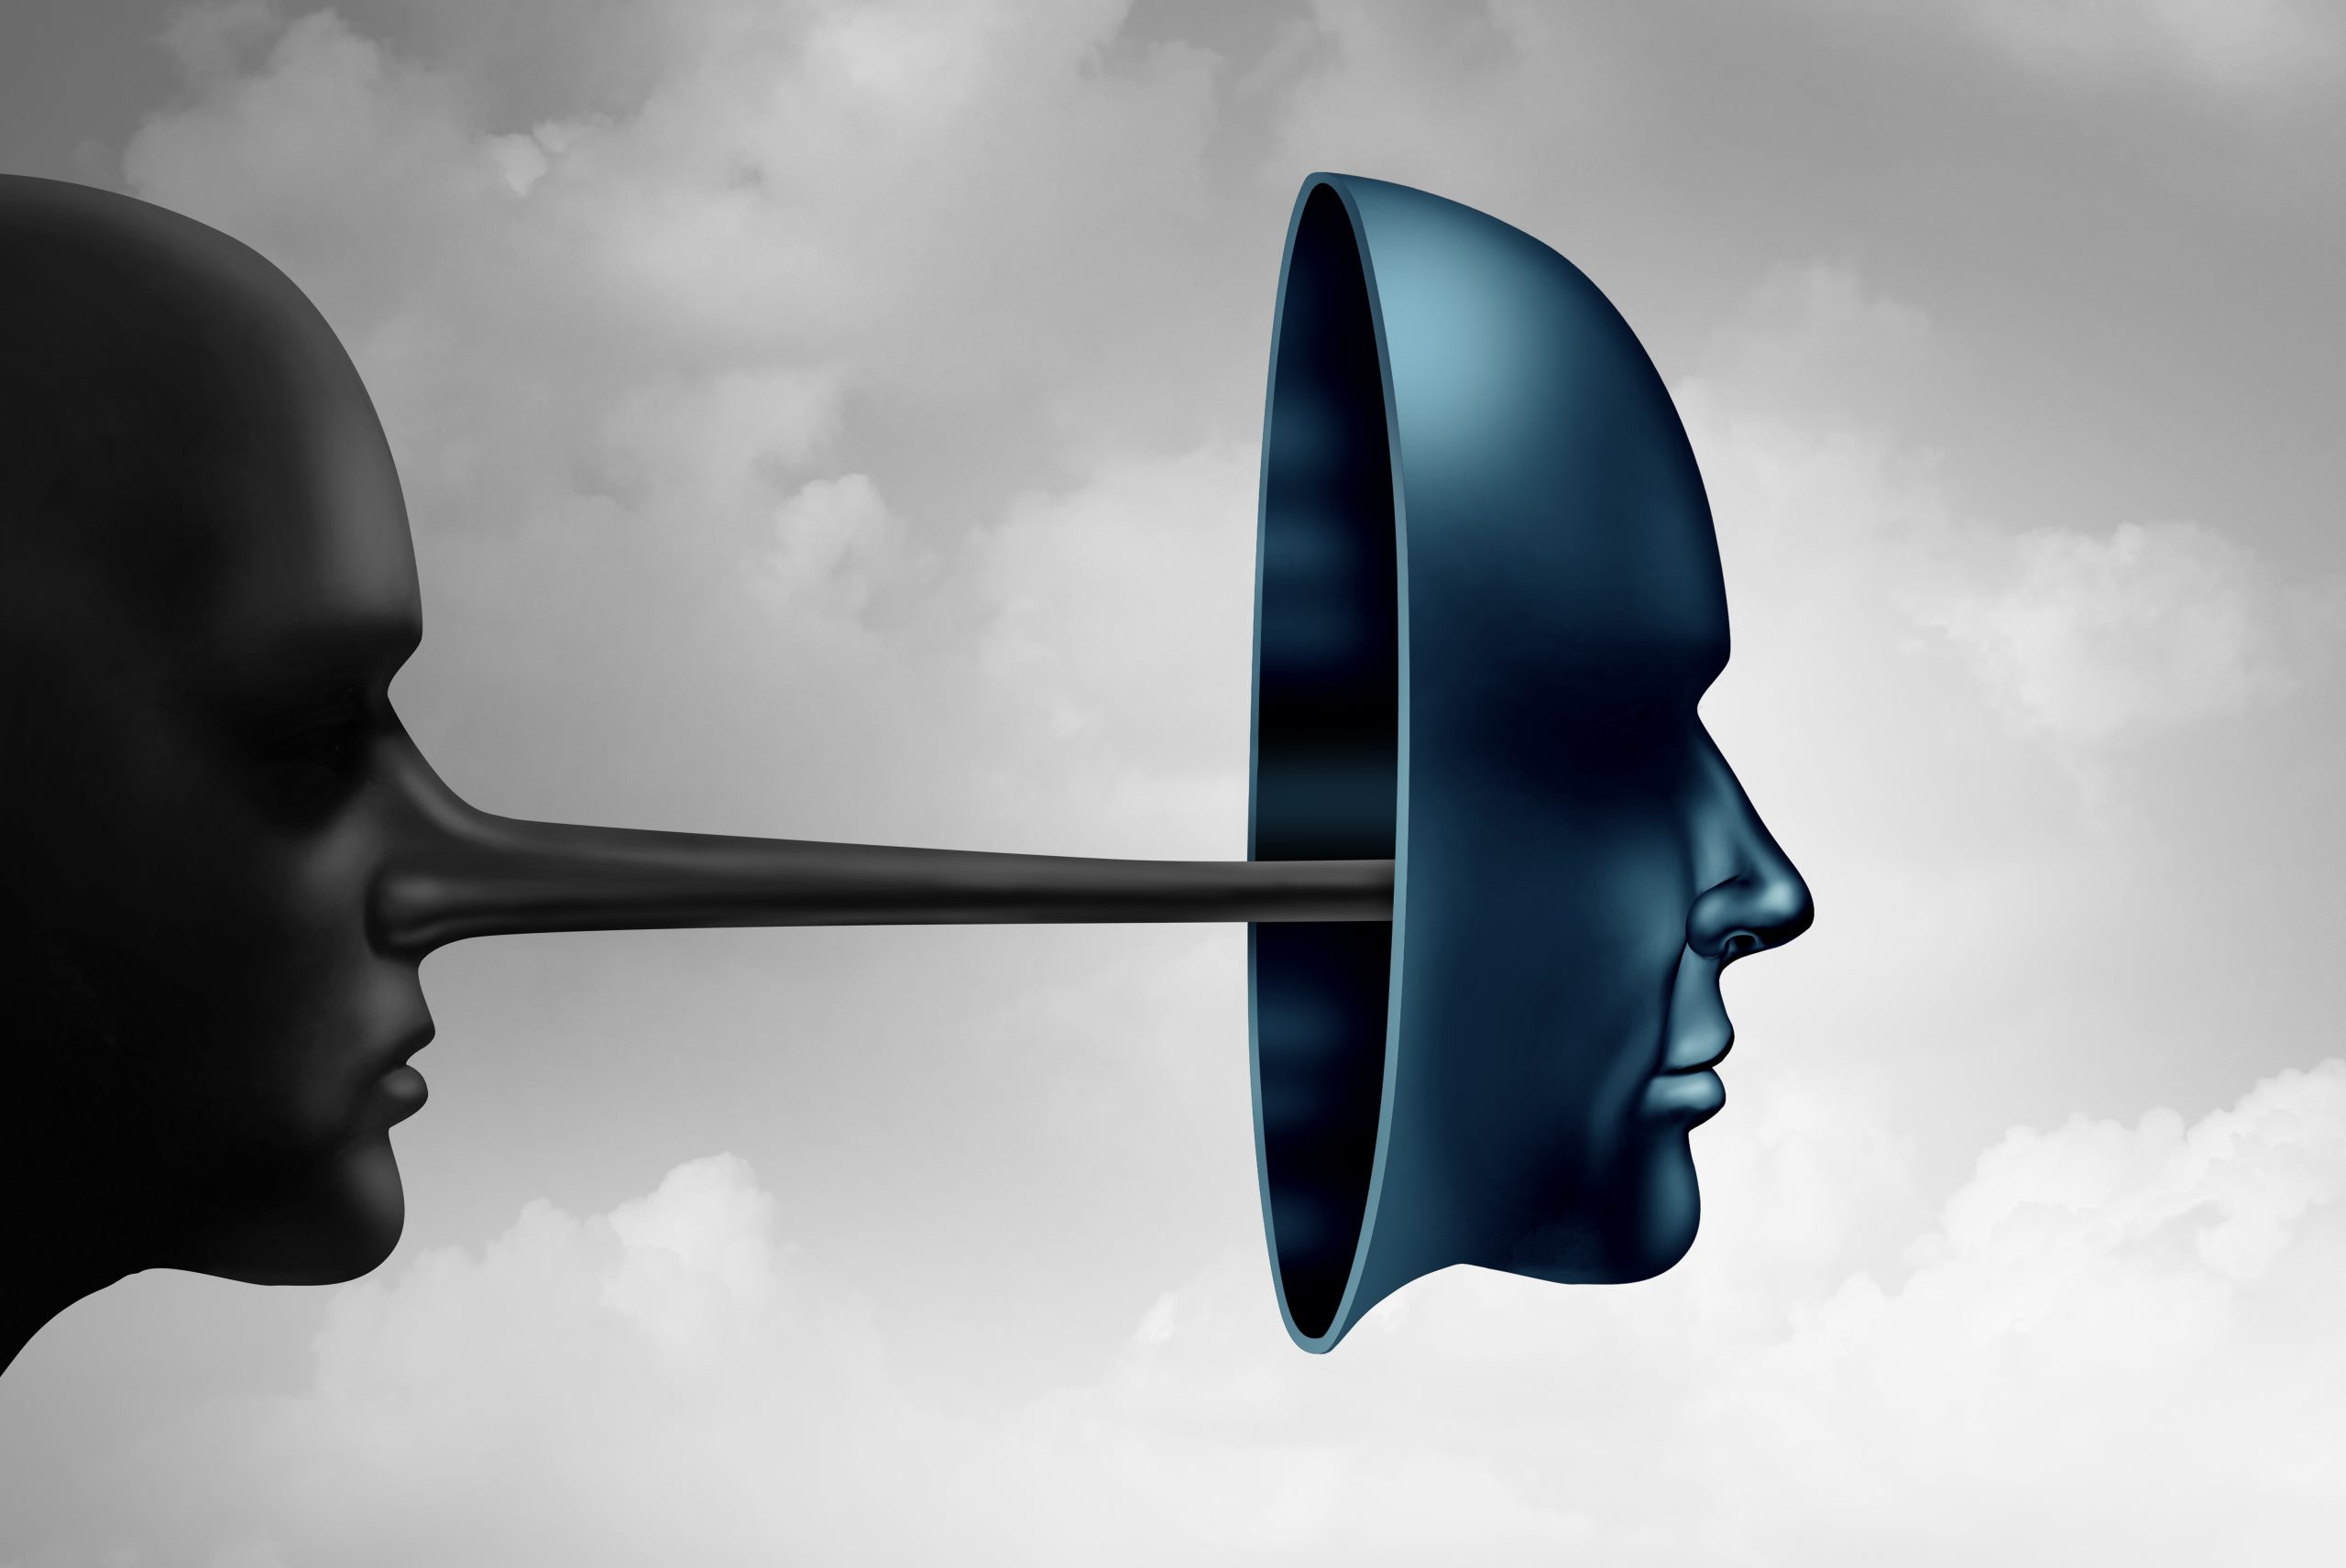 Header image: face in profile with long Pinocchio nose behind a trustworthy mask. Credit: Lightspring via Shutterstock.com